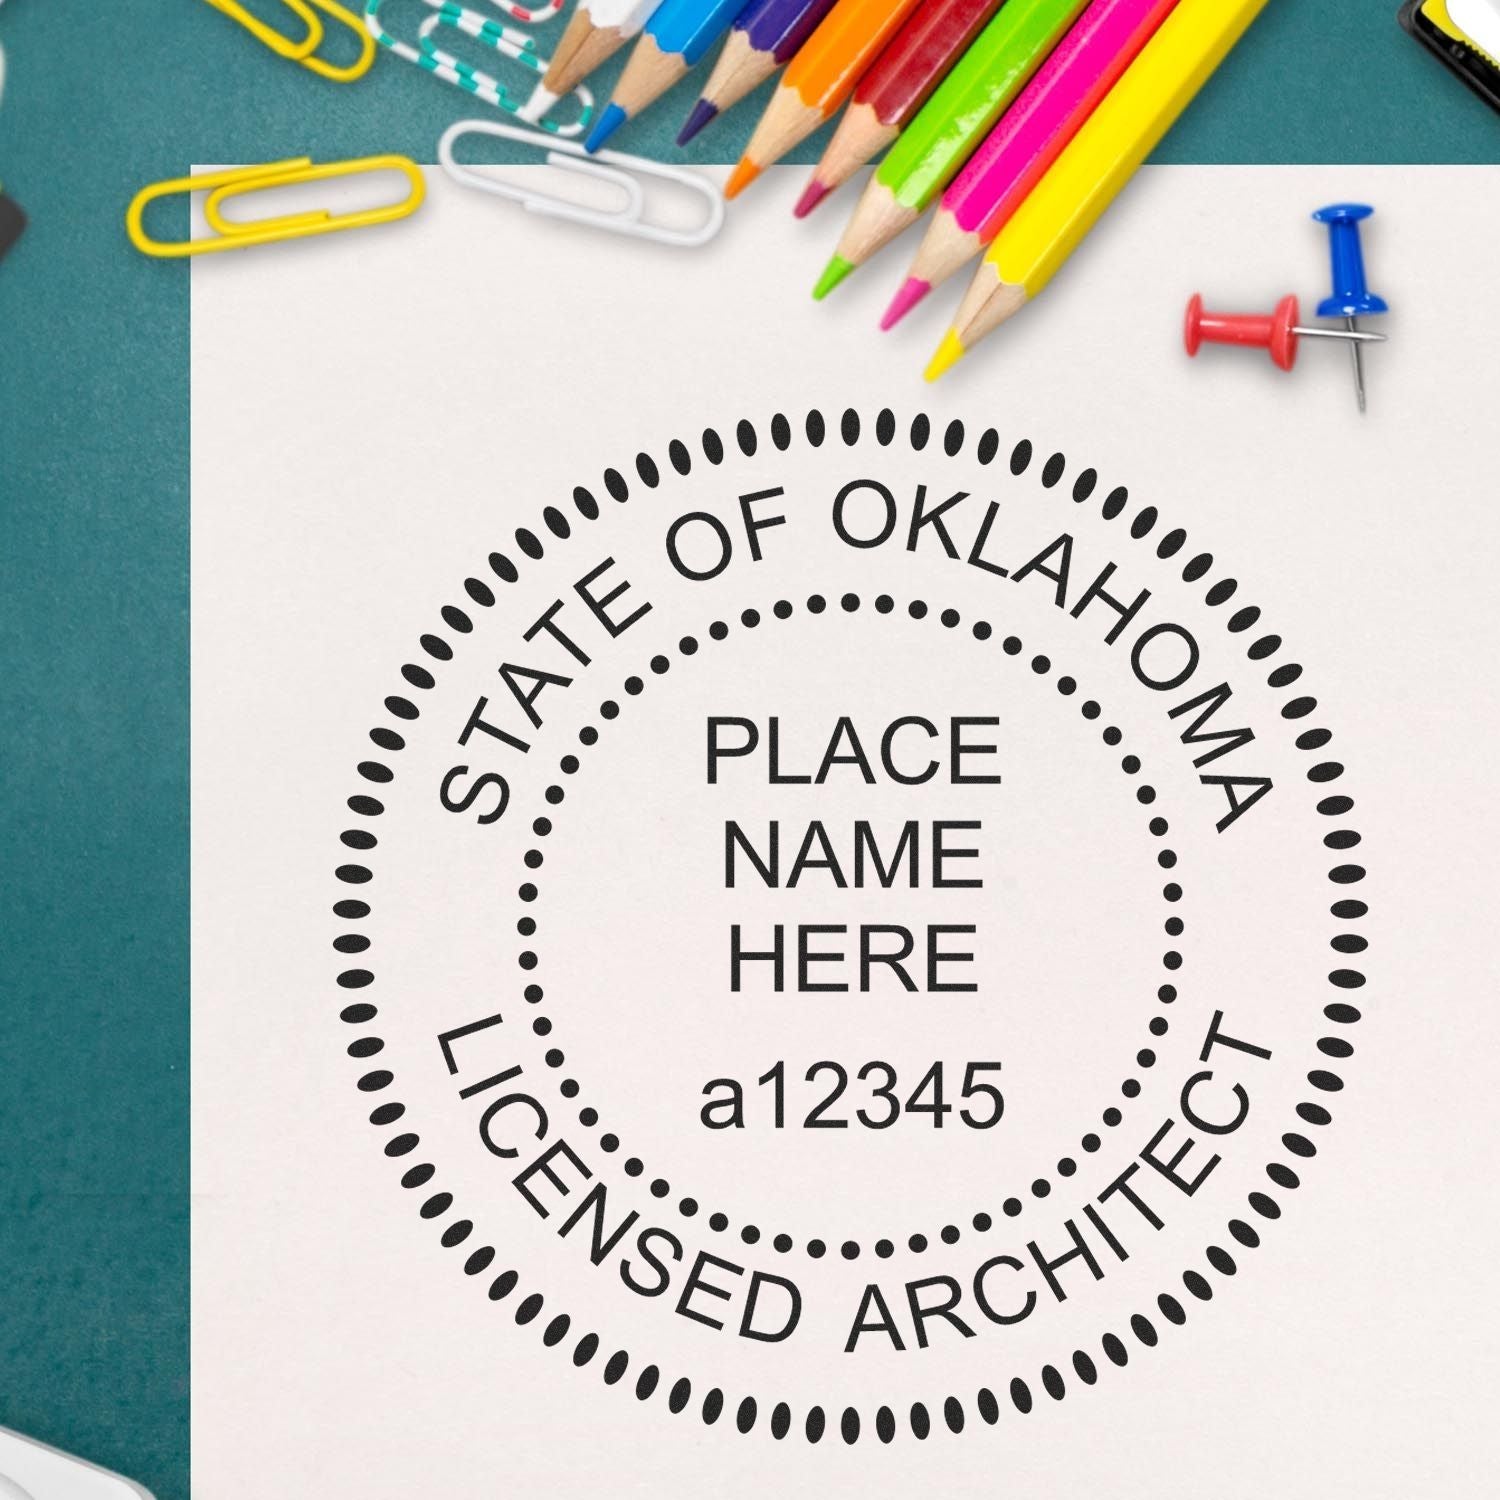 The Key to Professionalism: Oklahoma Architect Stamp Requirements Exposed Feature Image